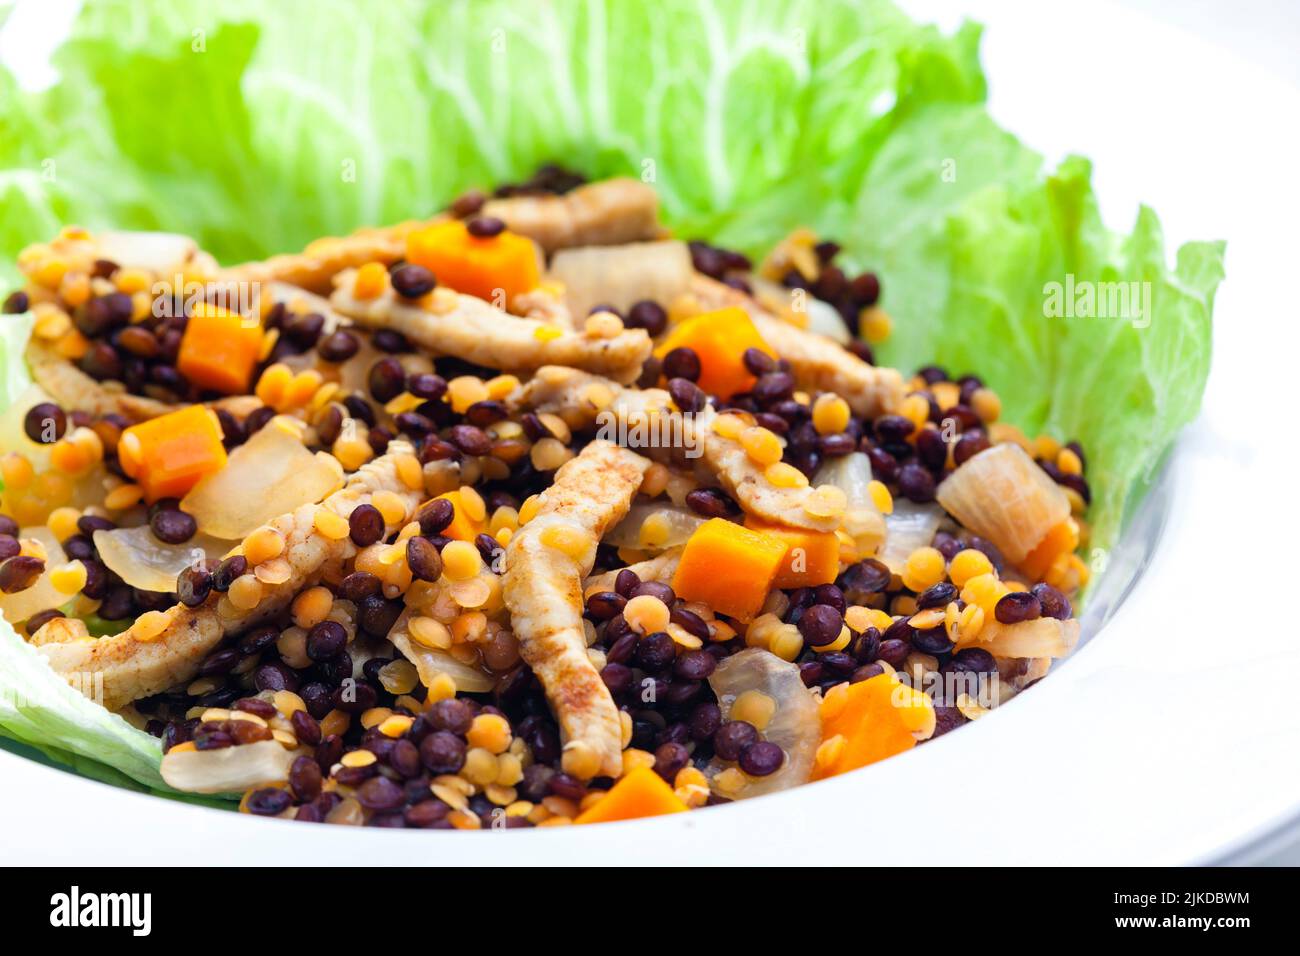 lentil salad with poultry meat and vegetables. Stock Photo